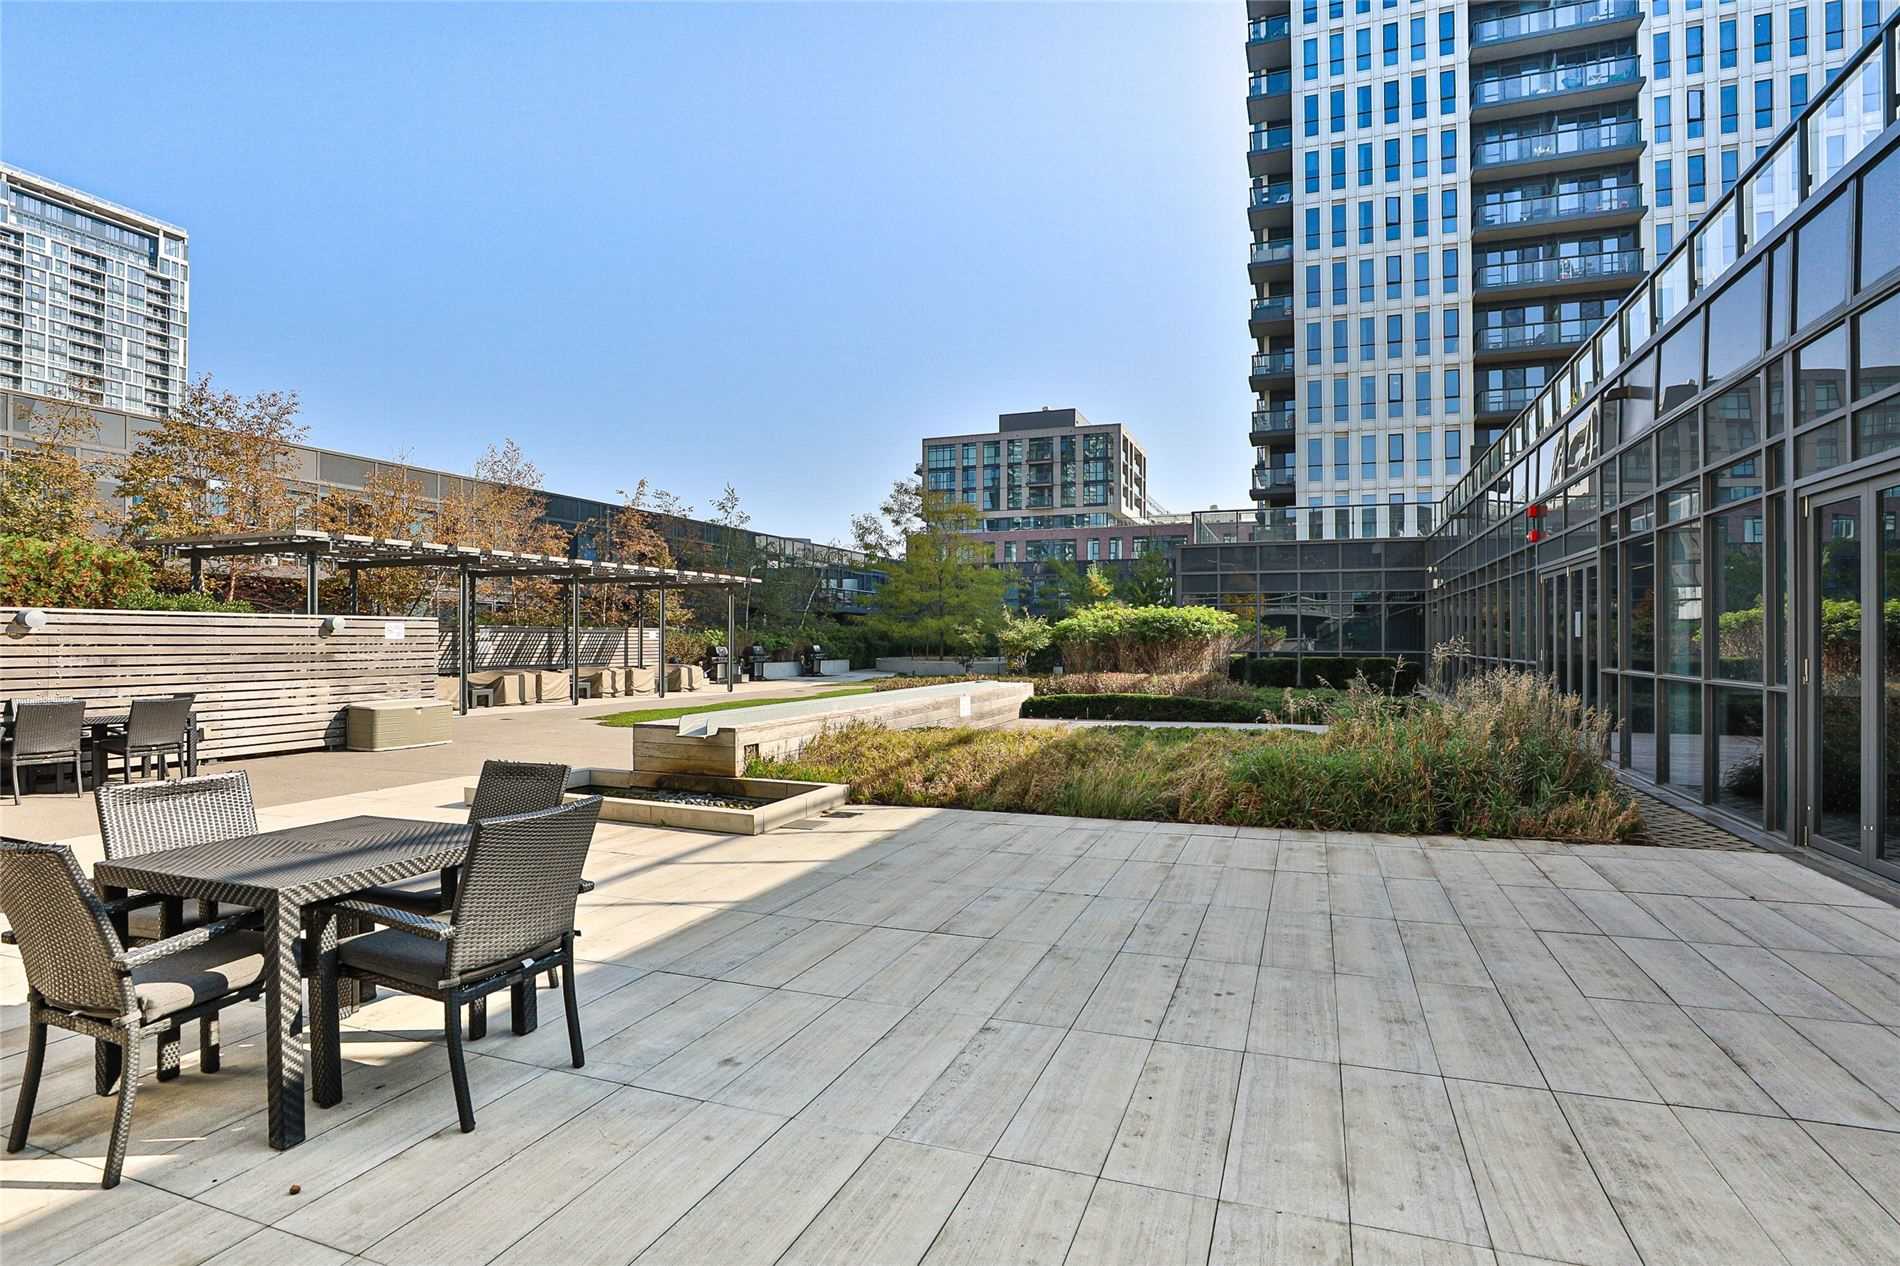 Rooftop deck and garden with barbecue equipment – One Park Place.